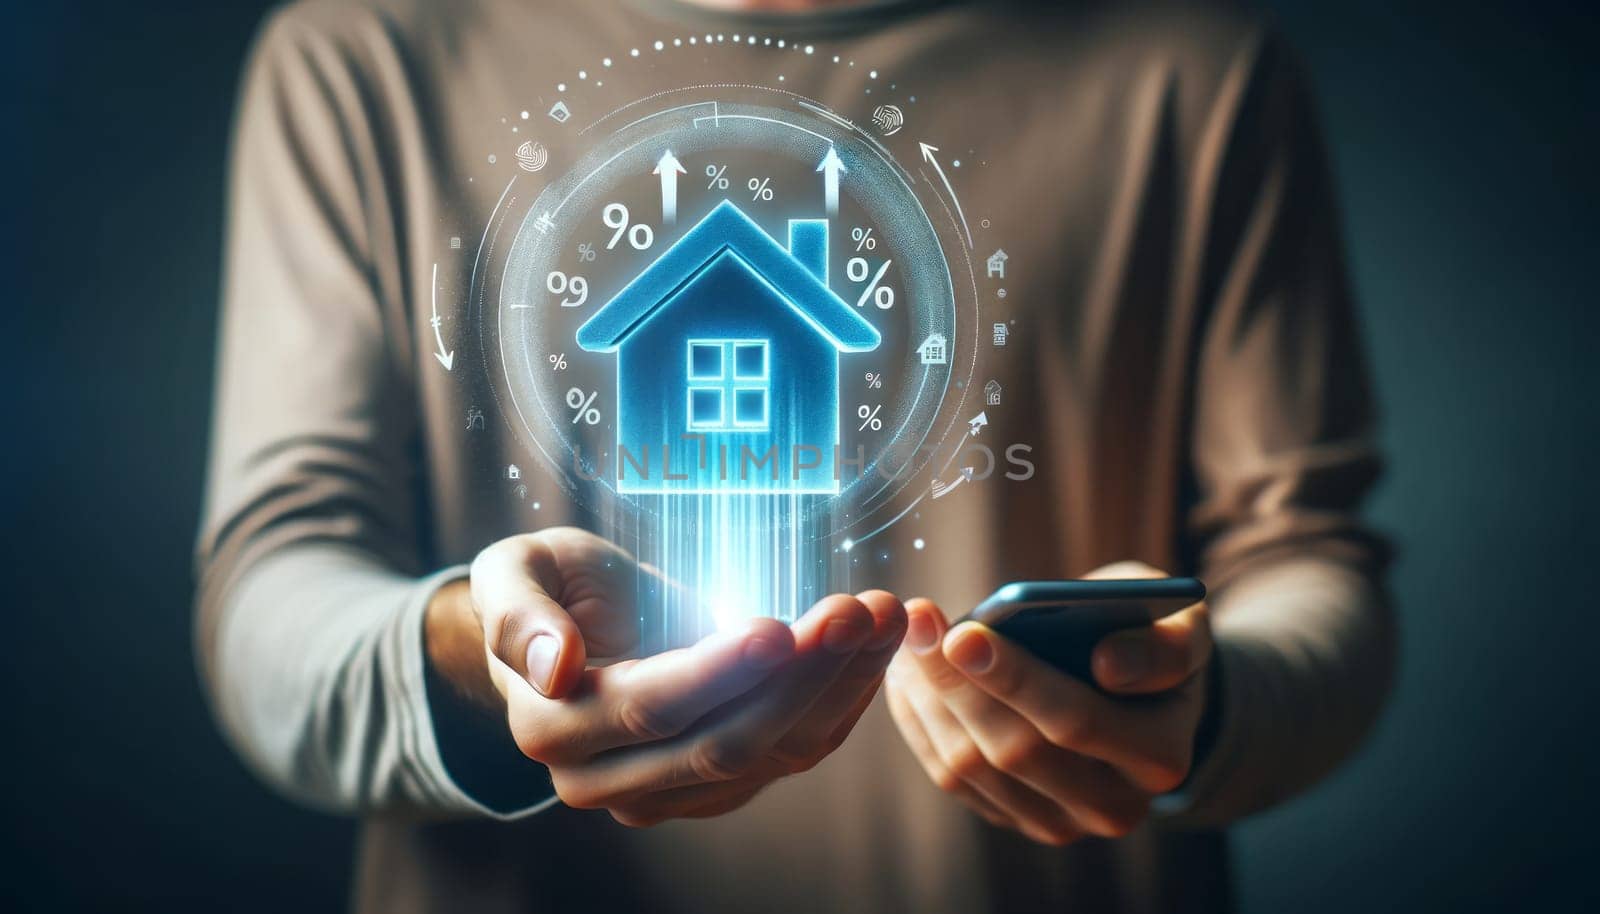 A digital illustration of a person's hand holding an open palm upward with a blue holographic house icon floating above it. The house has a window in the center, and there are white upward arrows and percentage signs around it, indicating a concept of rising home rates or investment growth in real estate. The person is holding a smartphone in the other hand and is wearing a light brown shirt. The background is out of focus with soft lighting, placing emphasis on the hand, the holographic house icon, and the smartphone.